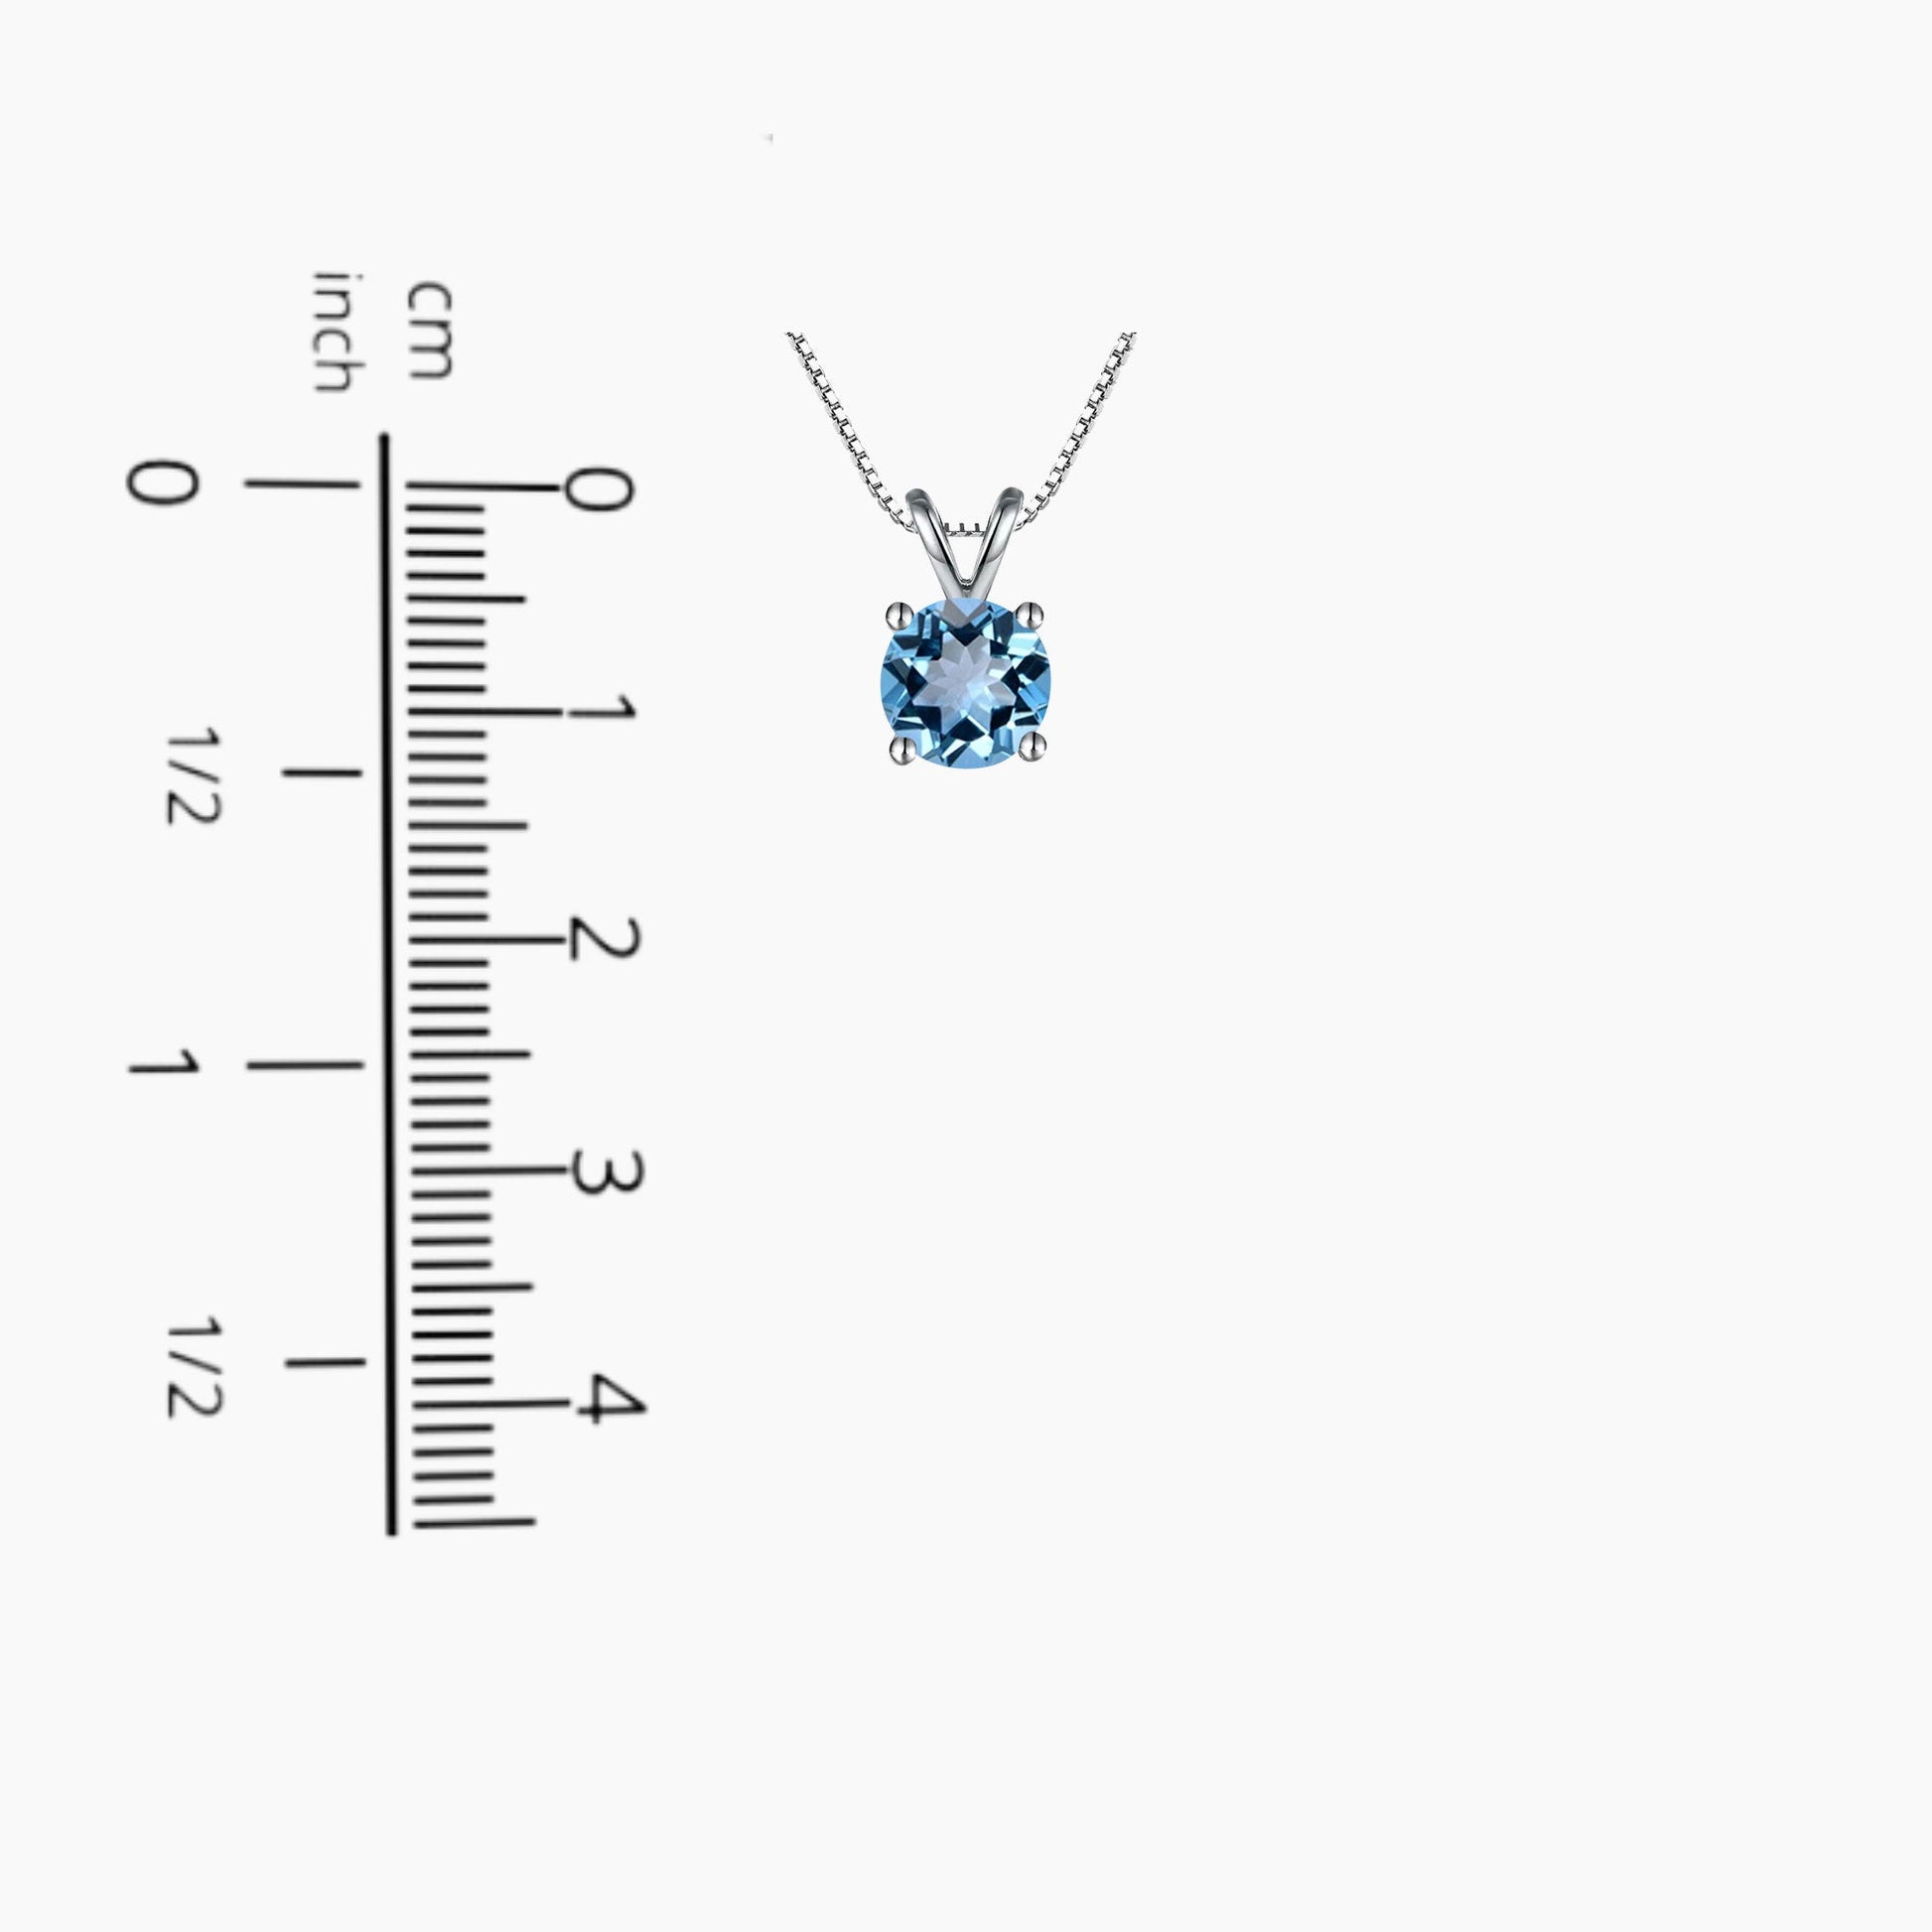 Round Cut Swiss Blue Topaz Pendant displayed next to a scale for size comparison